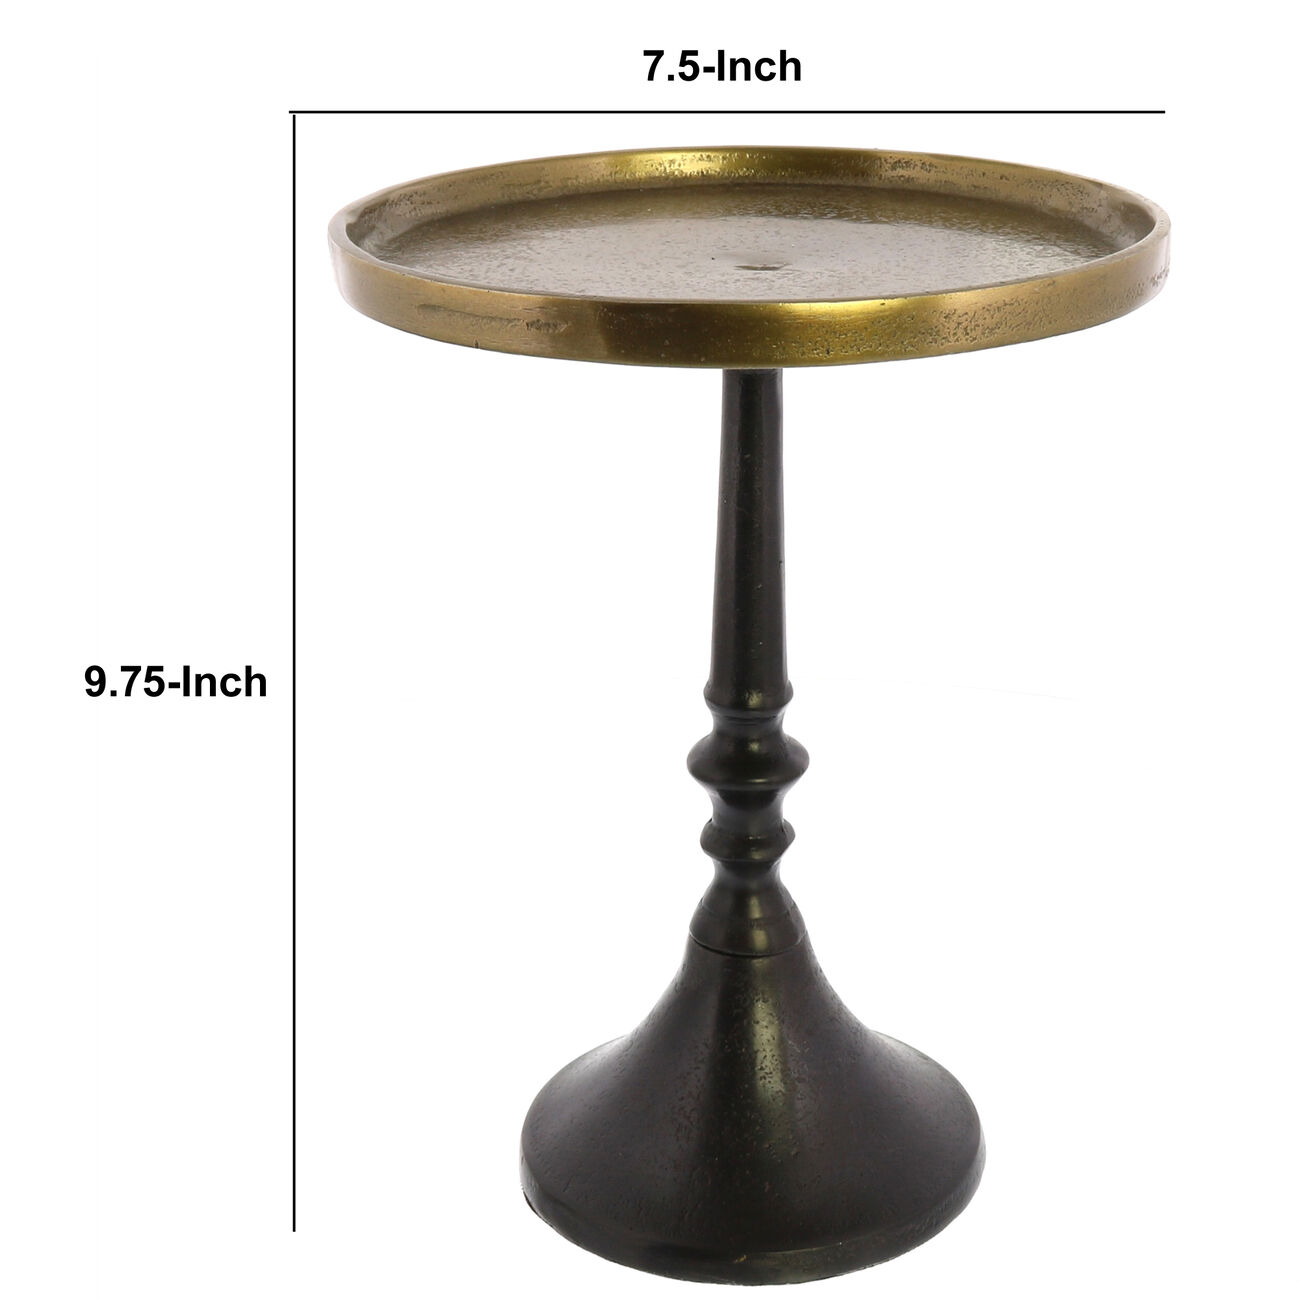 Pedestal with Turned Base, Medium, Black and Gold